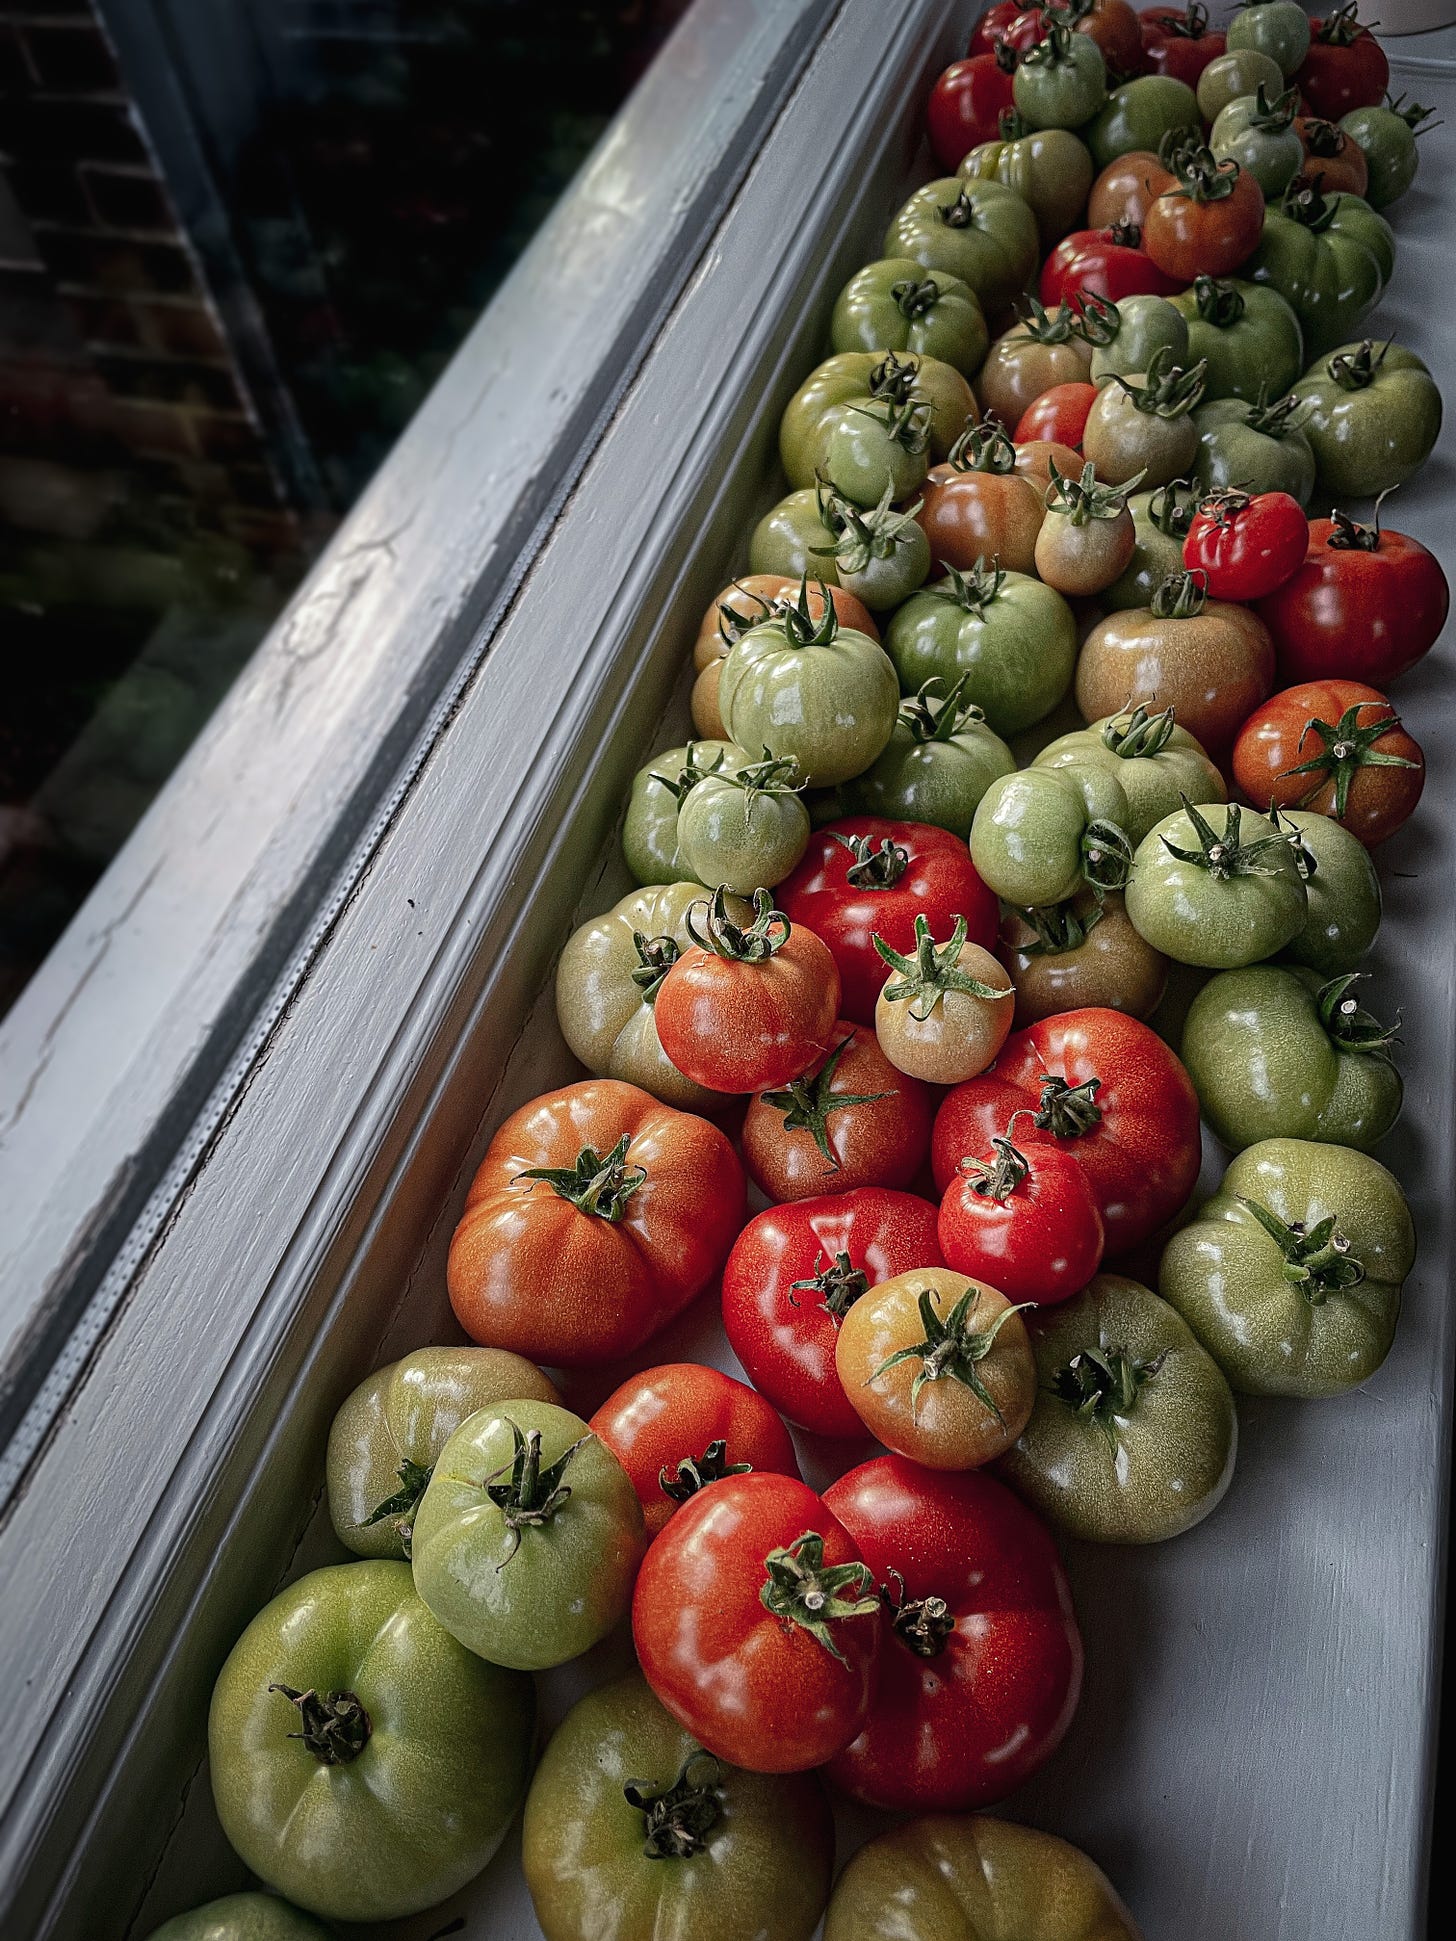 A windowsill filled with tomatoes in varying stages of ripeness.